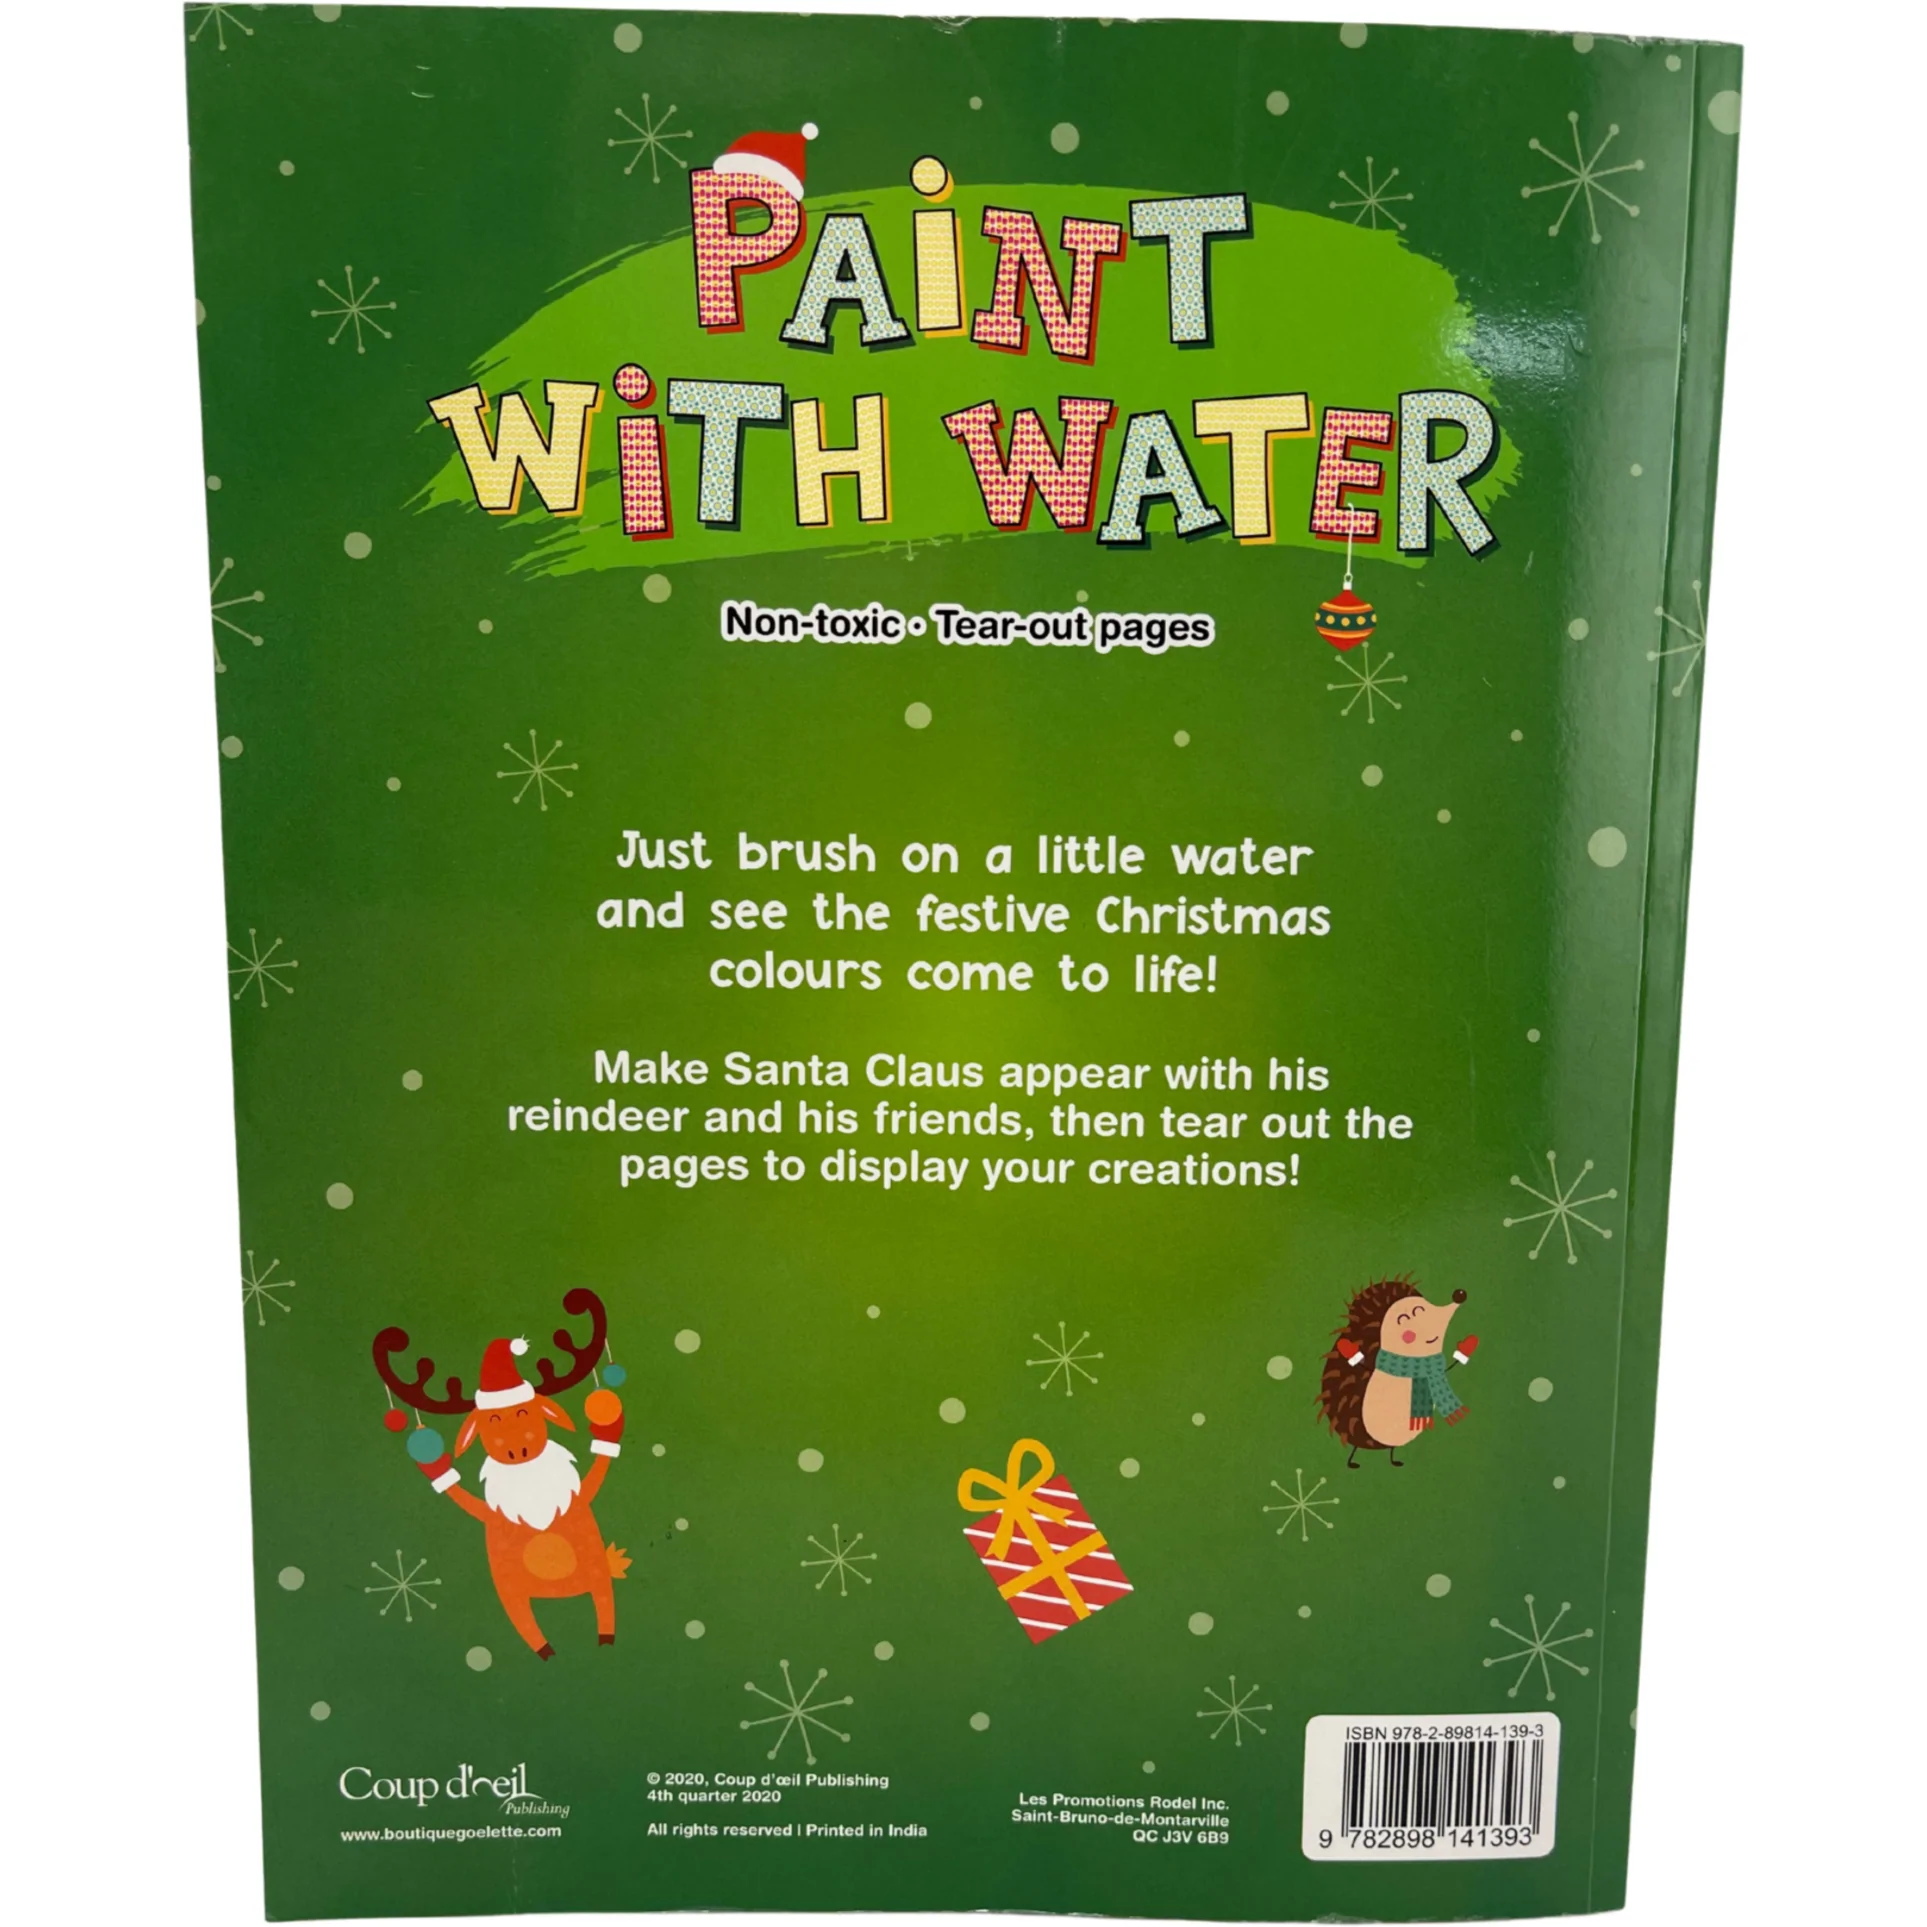 Coup D'oeil Christmas Watercolour Painting Book / Paint with Water / English Edition